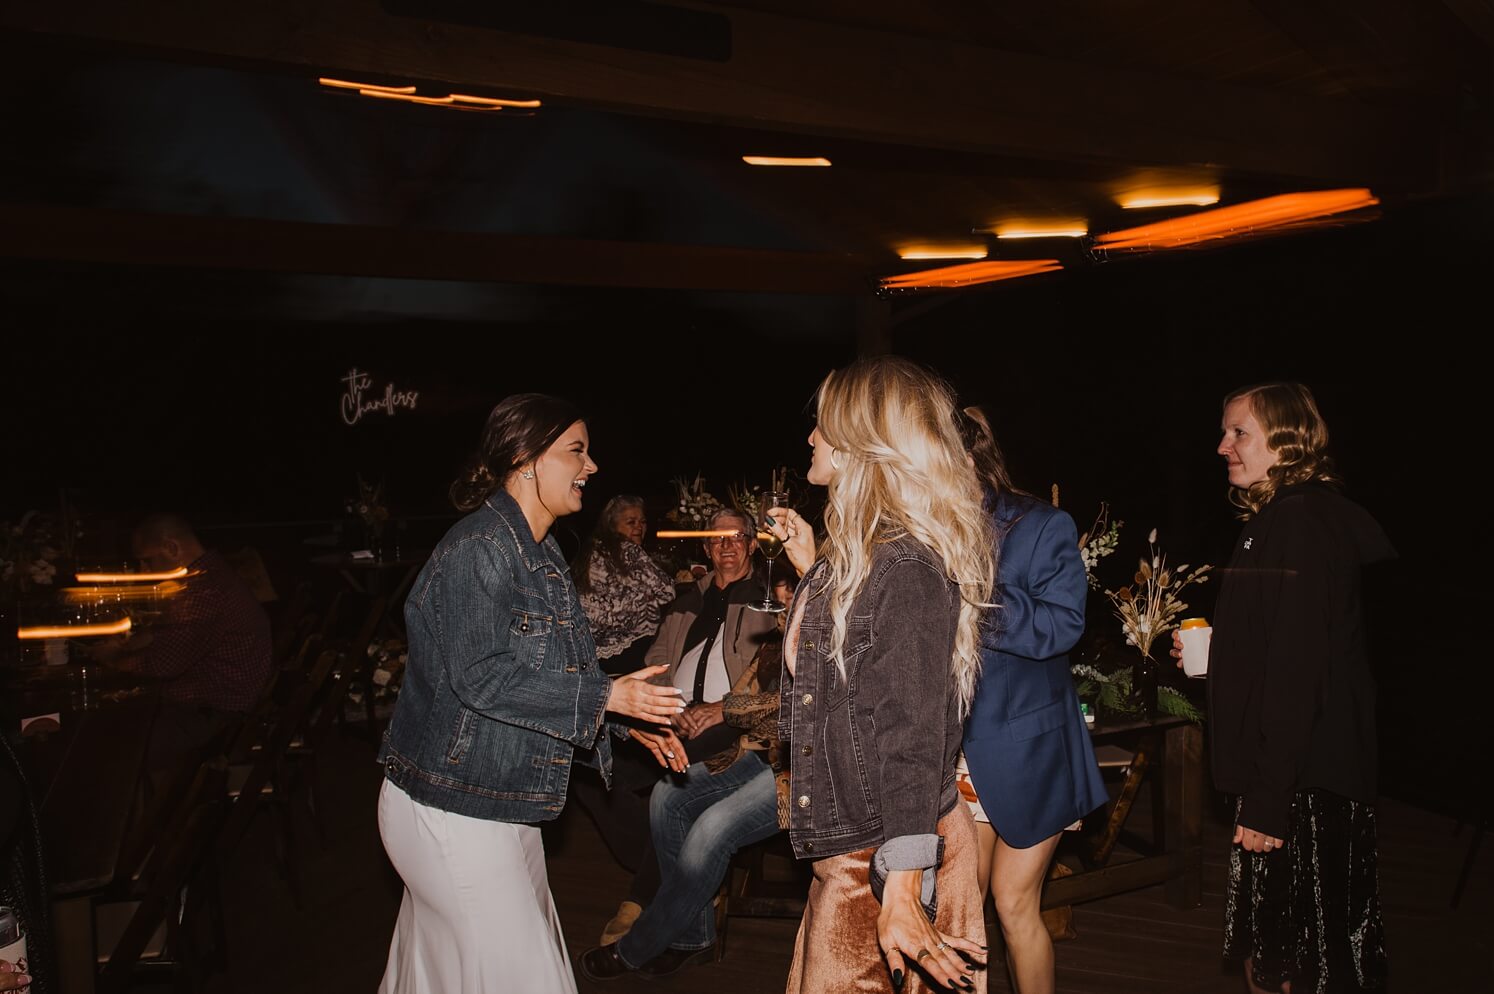 Bride dancing with friends at wedding reception | McArthur Weddings and Events